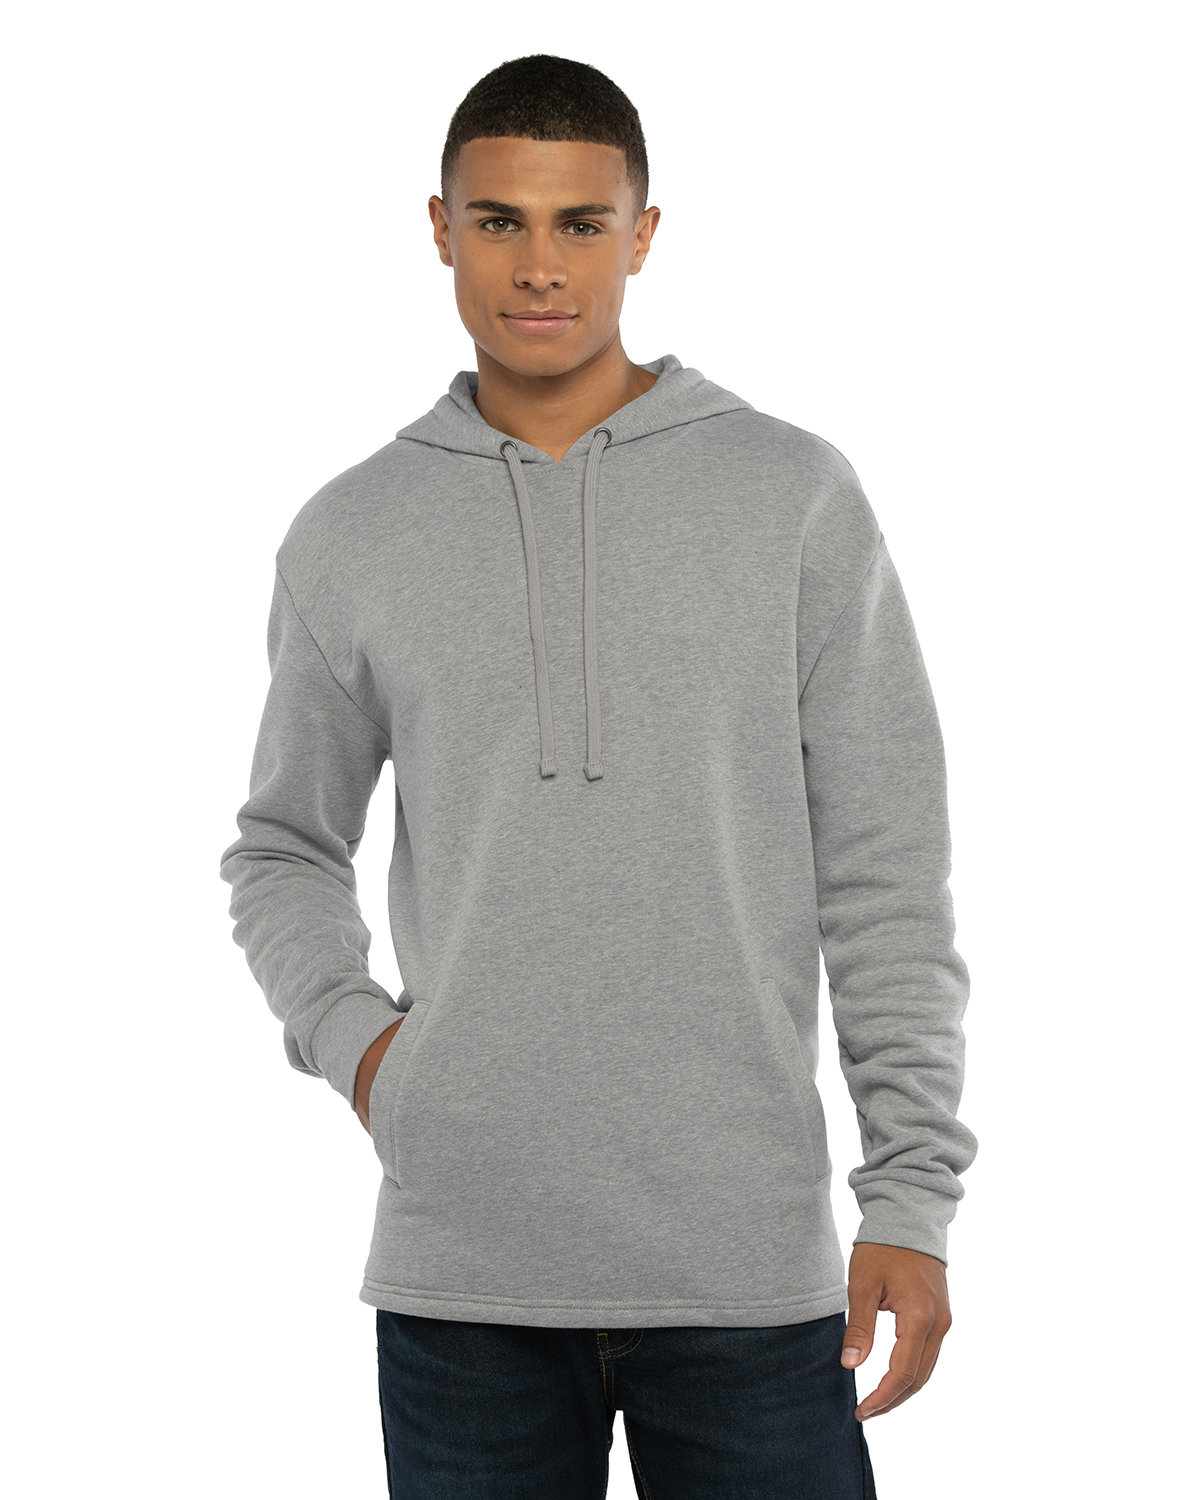 Next Level Adult PCH Pullover Hoodie HEATHER GRAY 